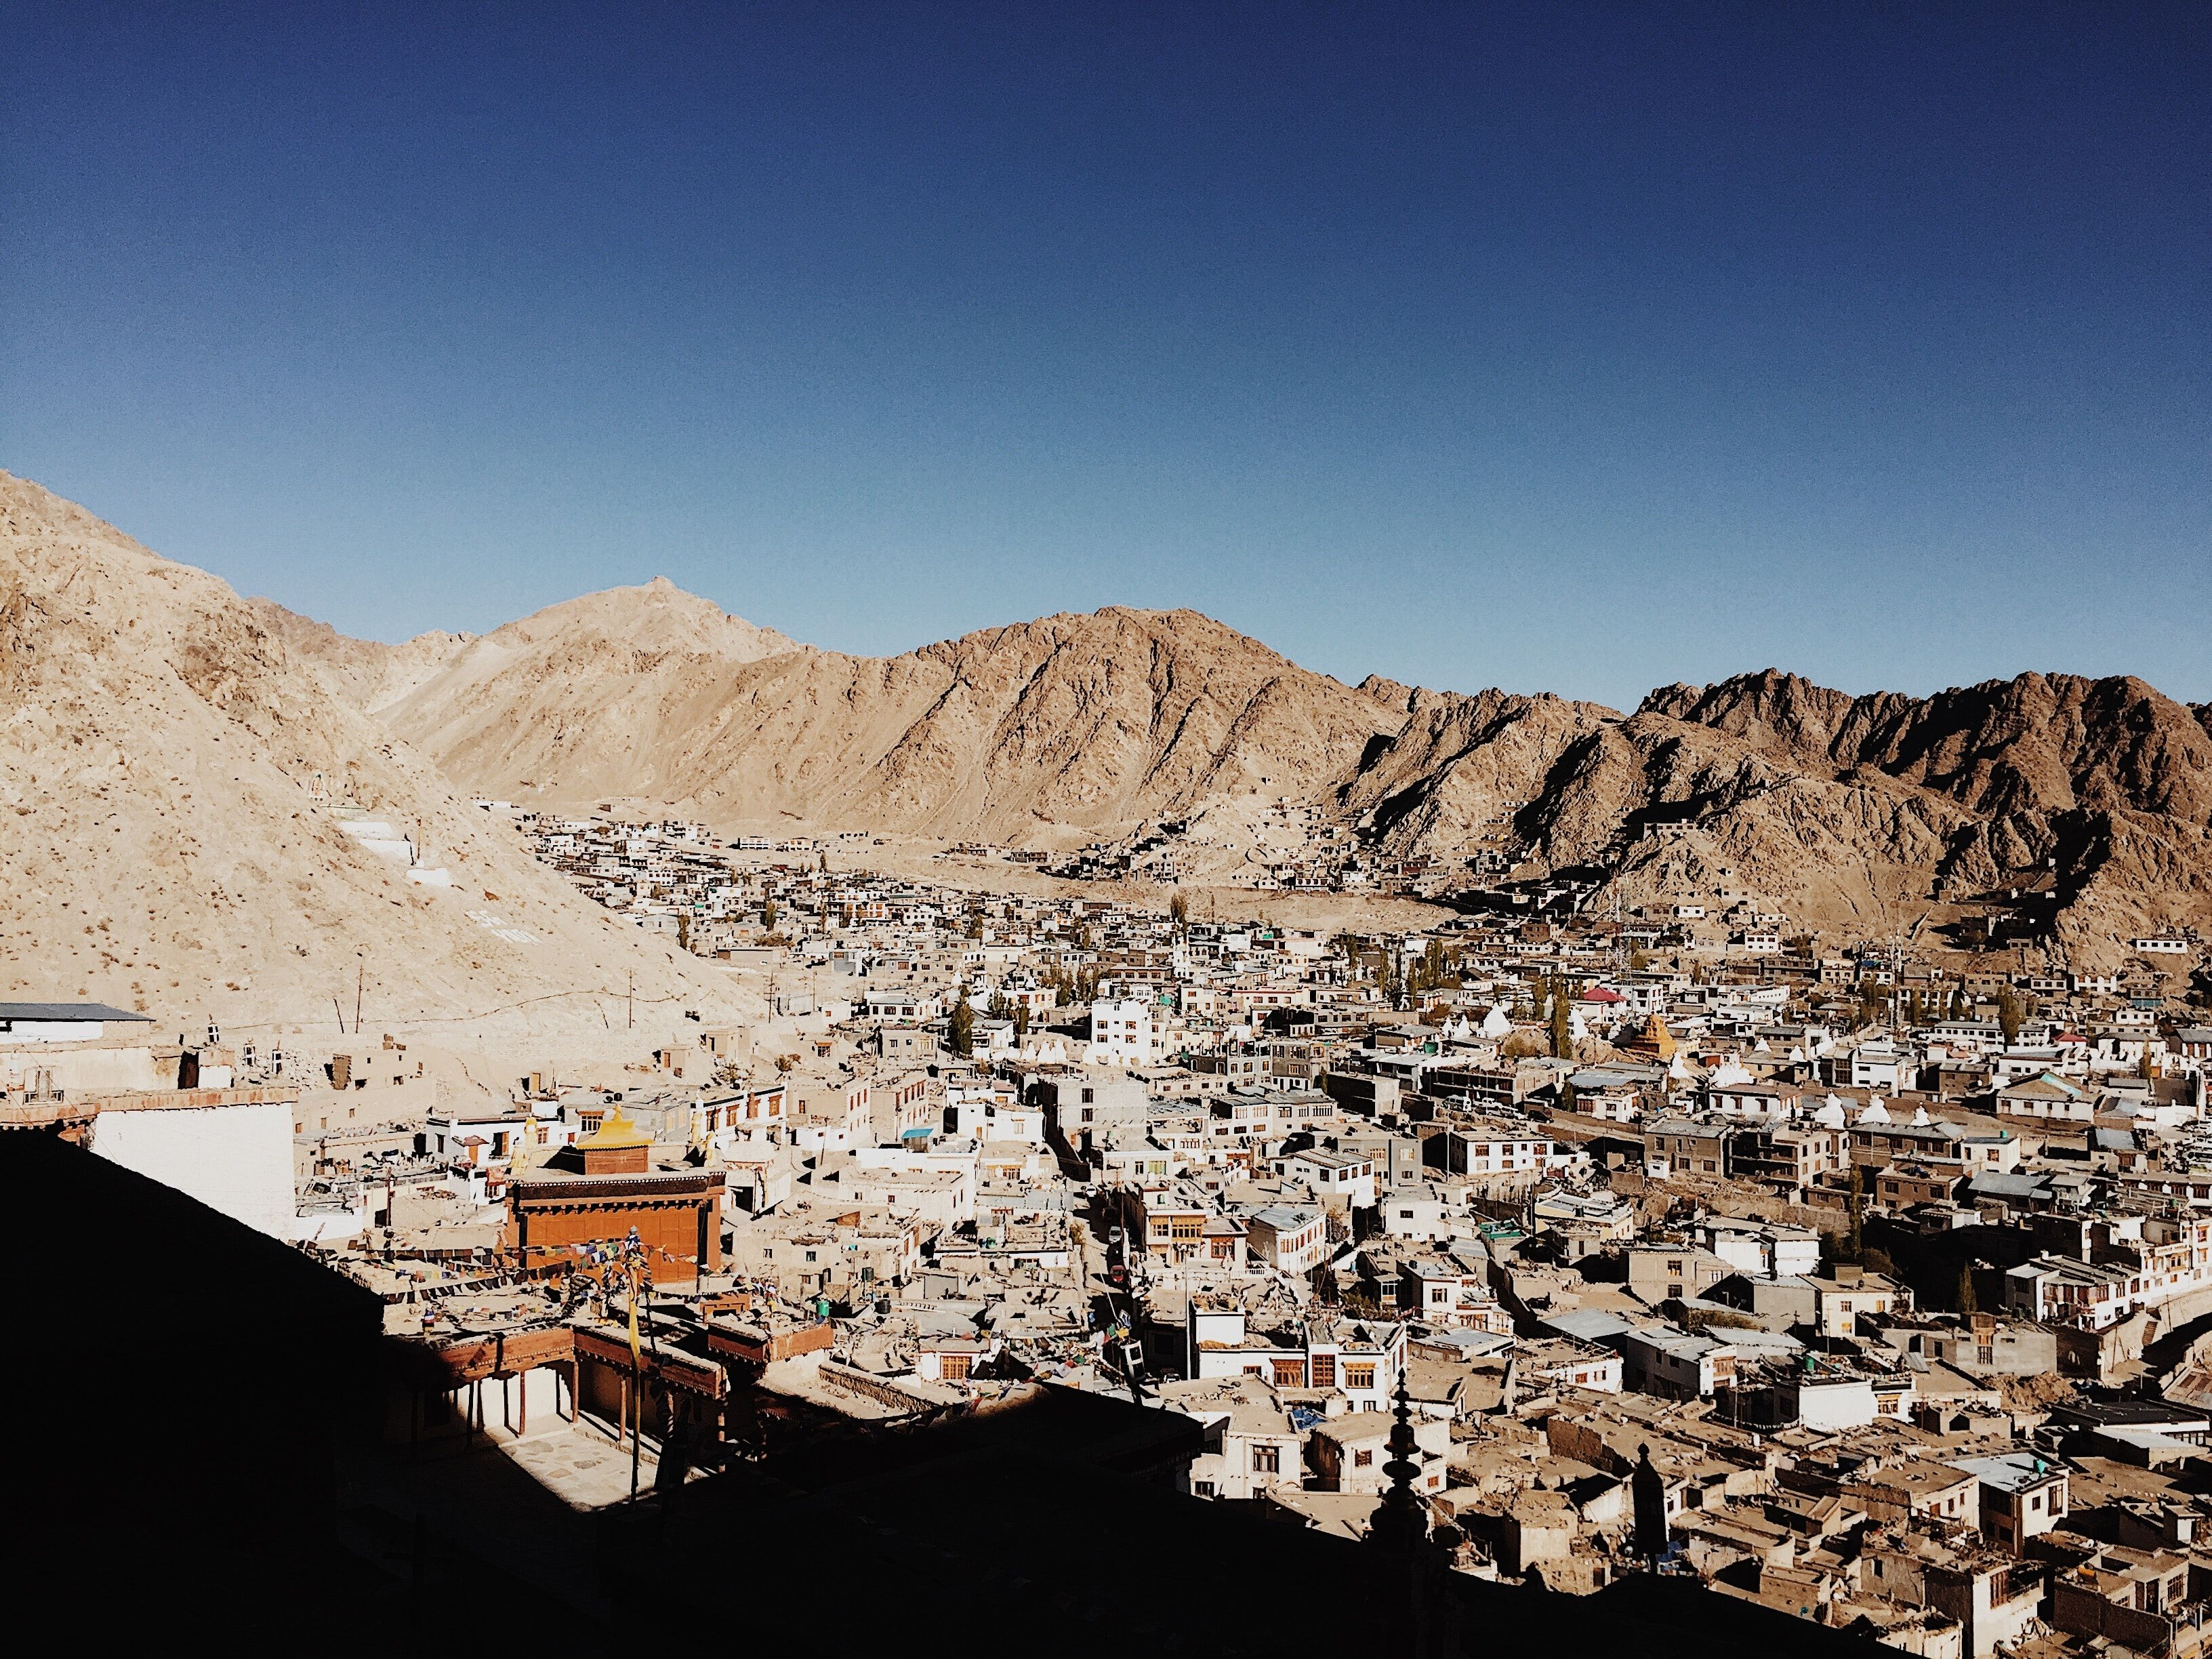 Ladakh Vacation, Leh Picture. Download Free Image